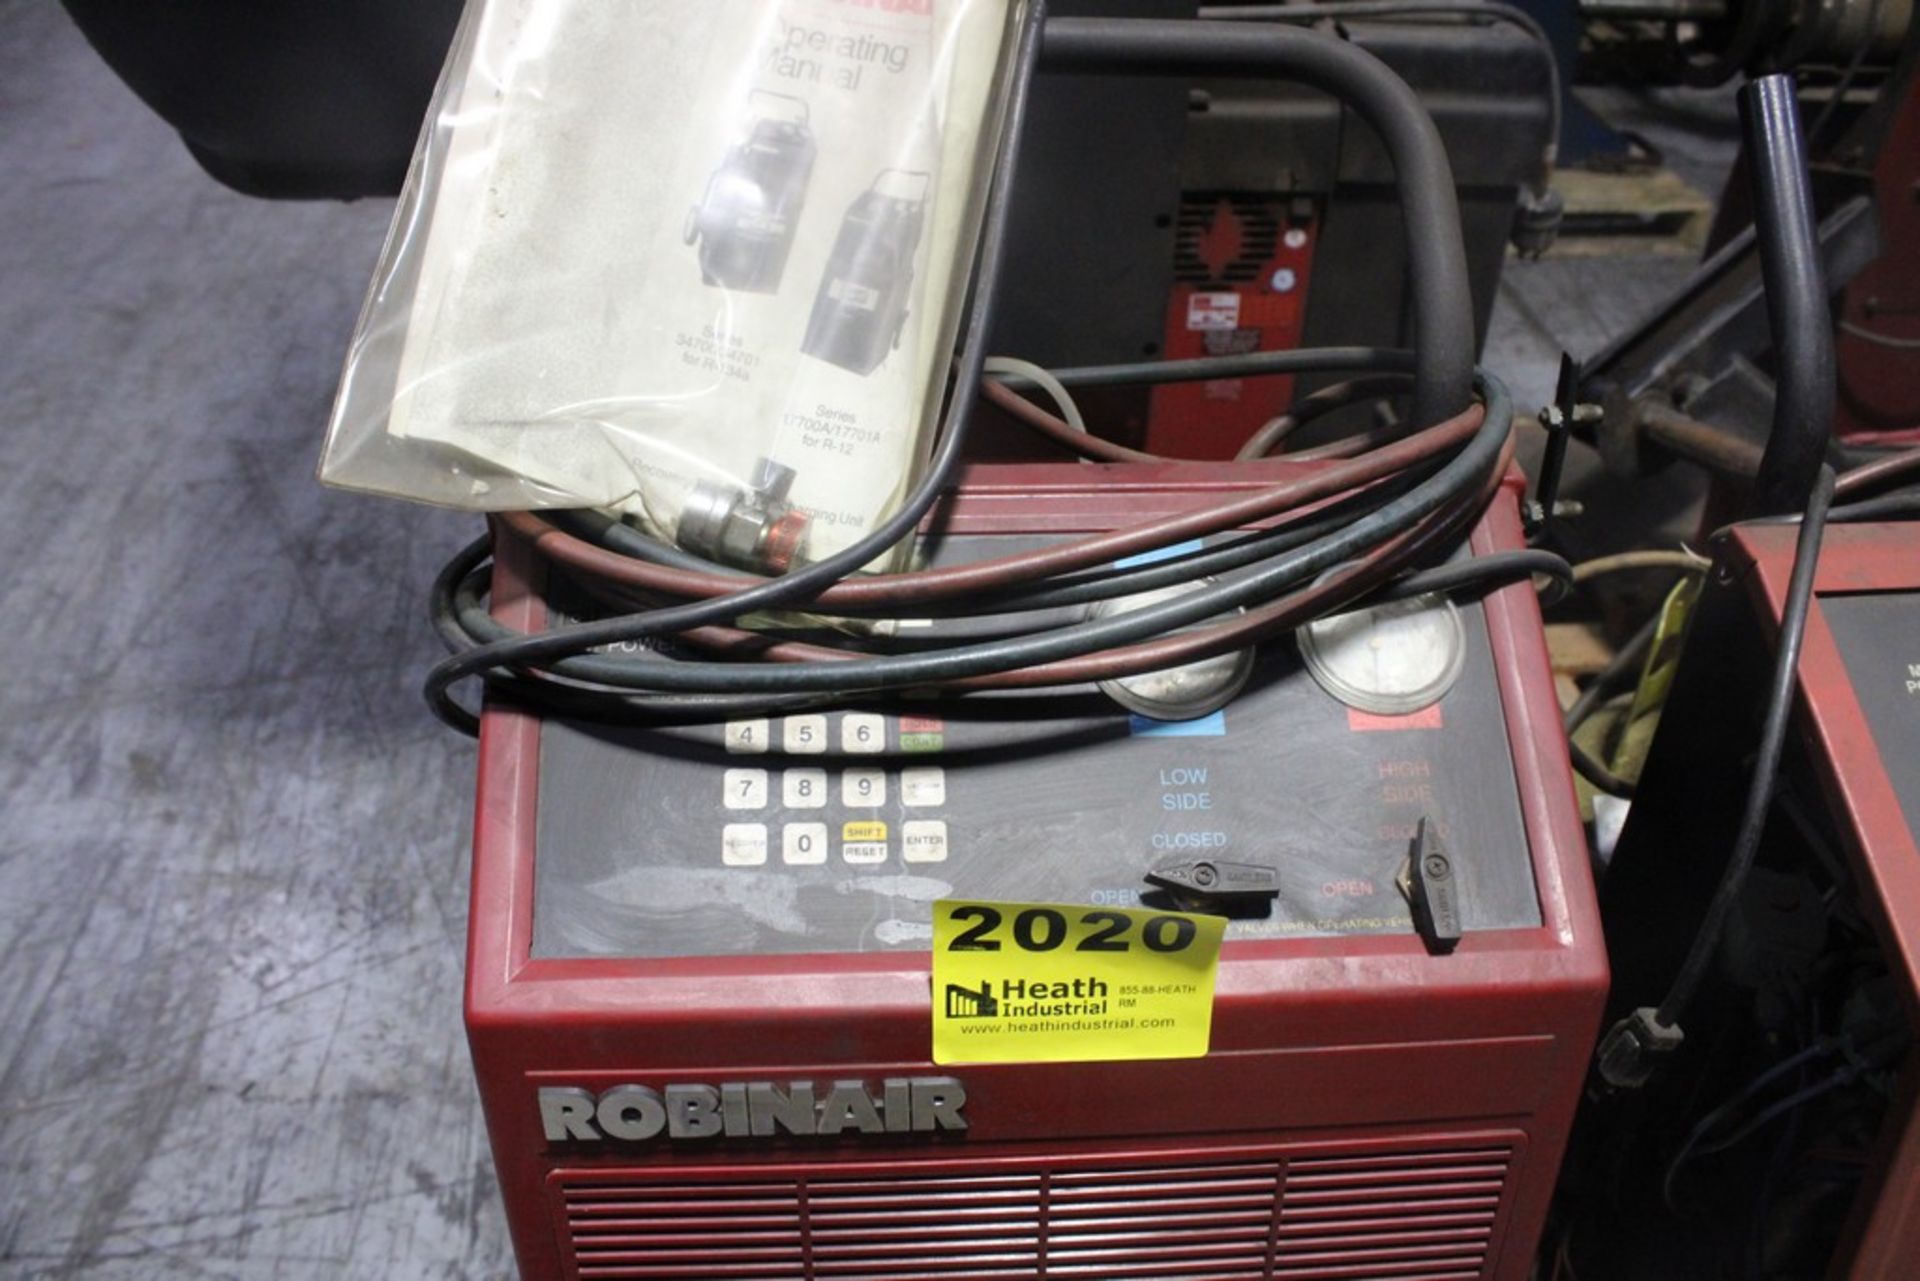 ROBINAIR MODEL 17700A REFRIDGERANT RECOVERY / RECYCLING / RECHARGING SYSTEM - Image 2 of 3